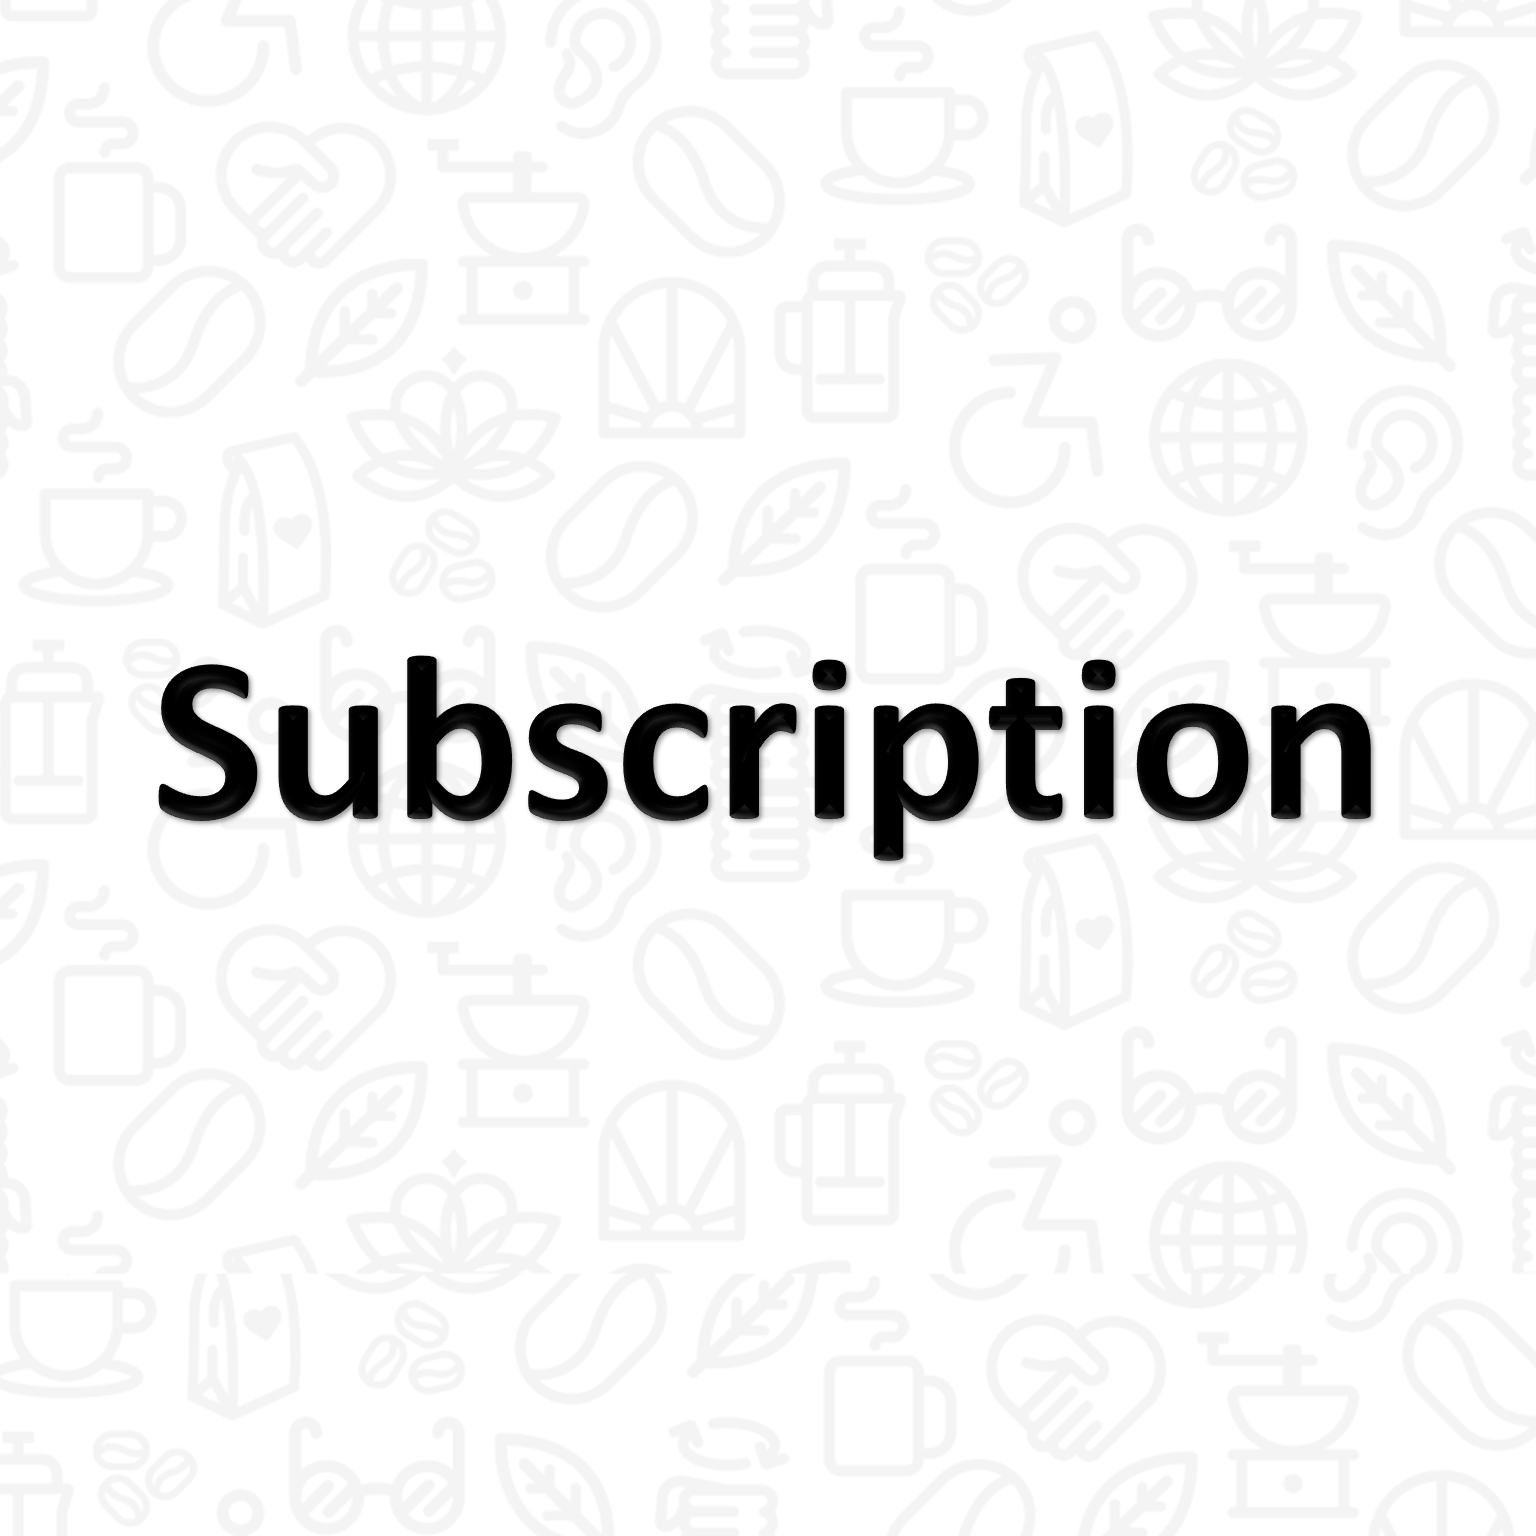 The word "Subscription" on a background covered with coffee and disability icons in line art